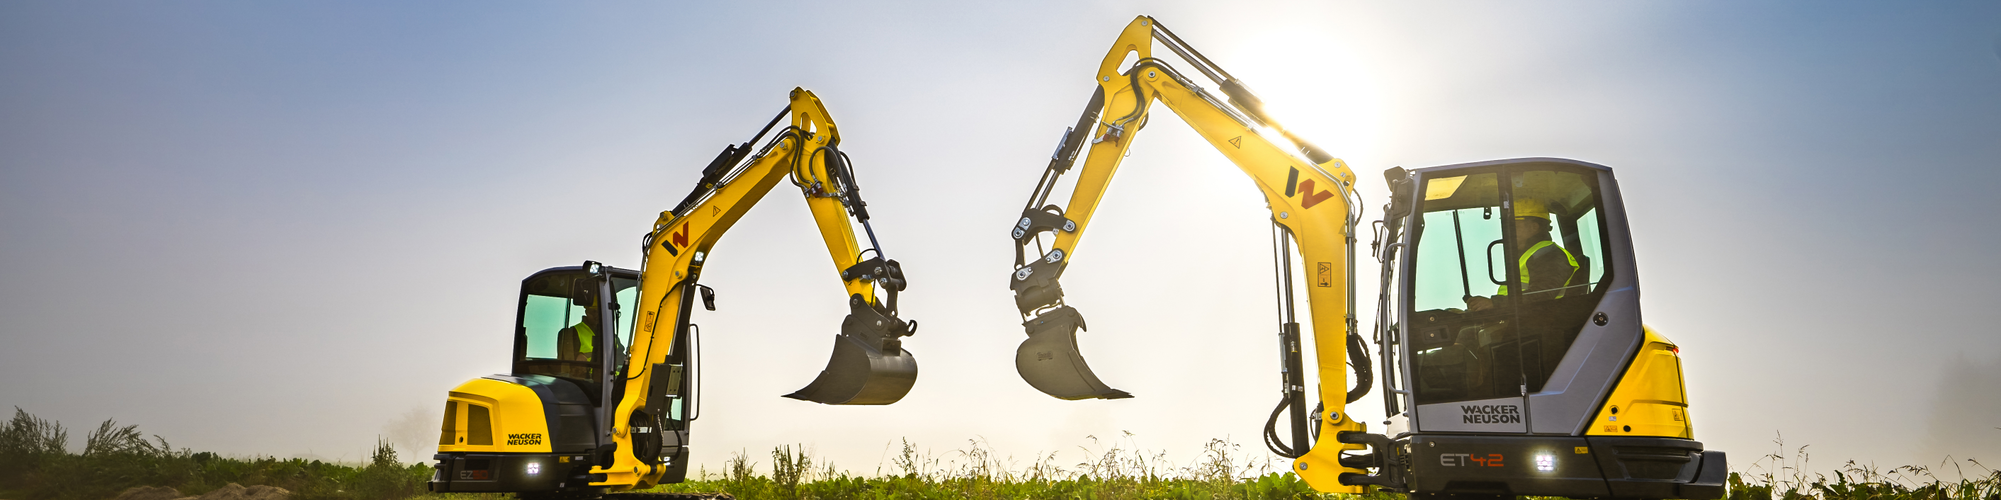 Two Wacker Neuson tracked excavators standing on a construction site.